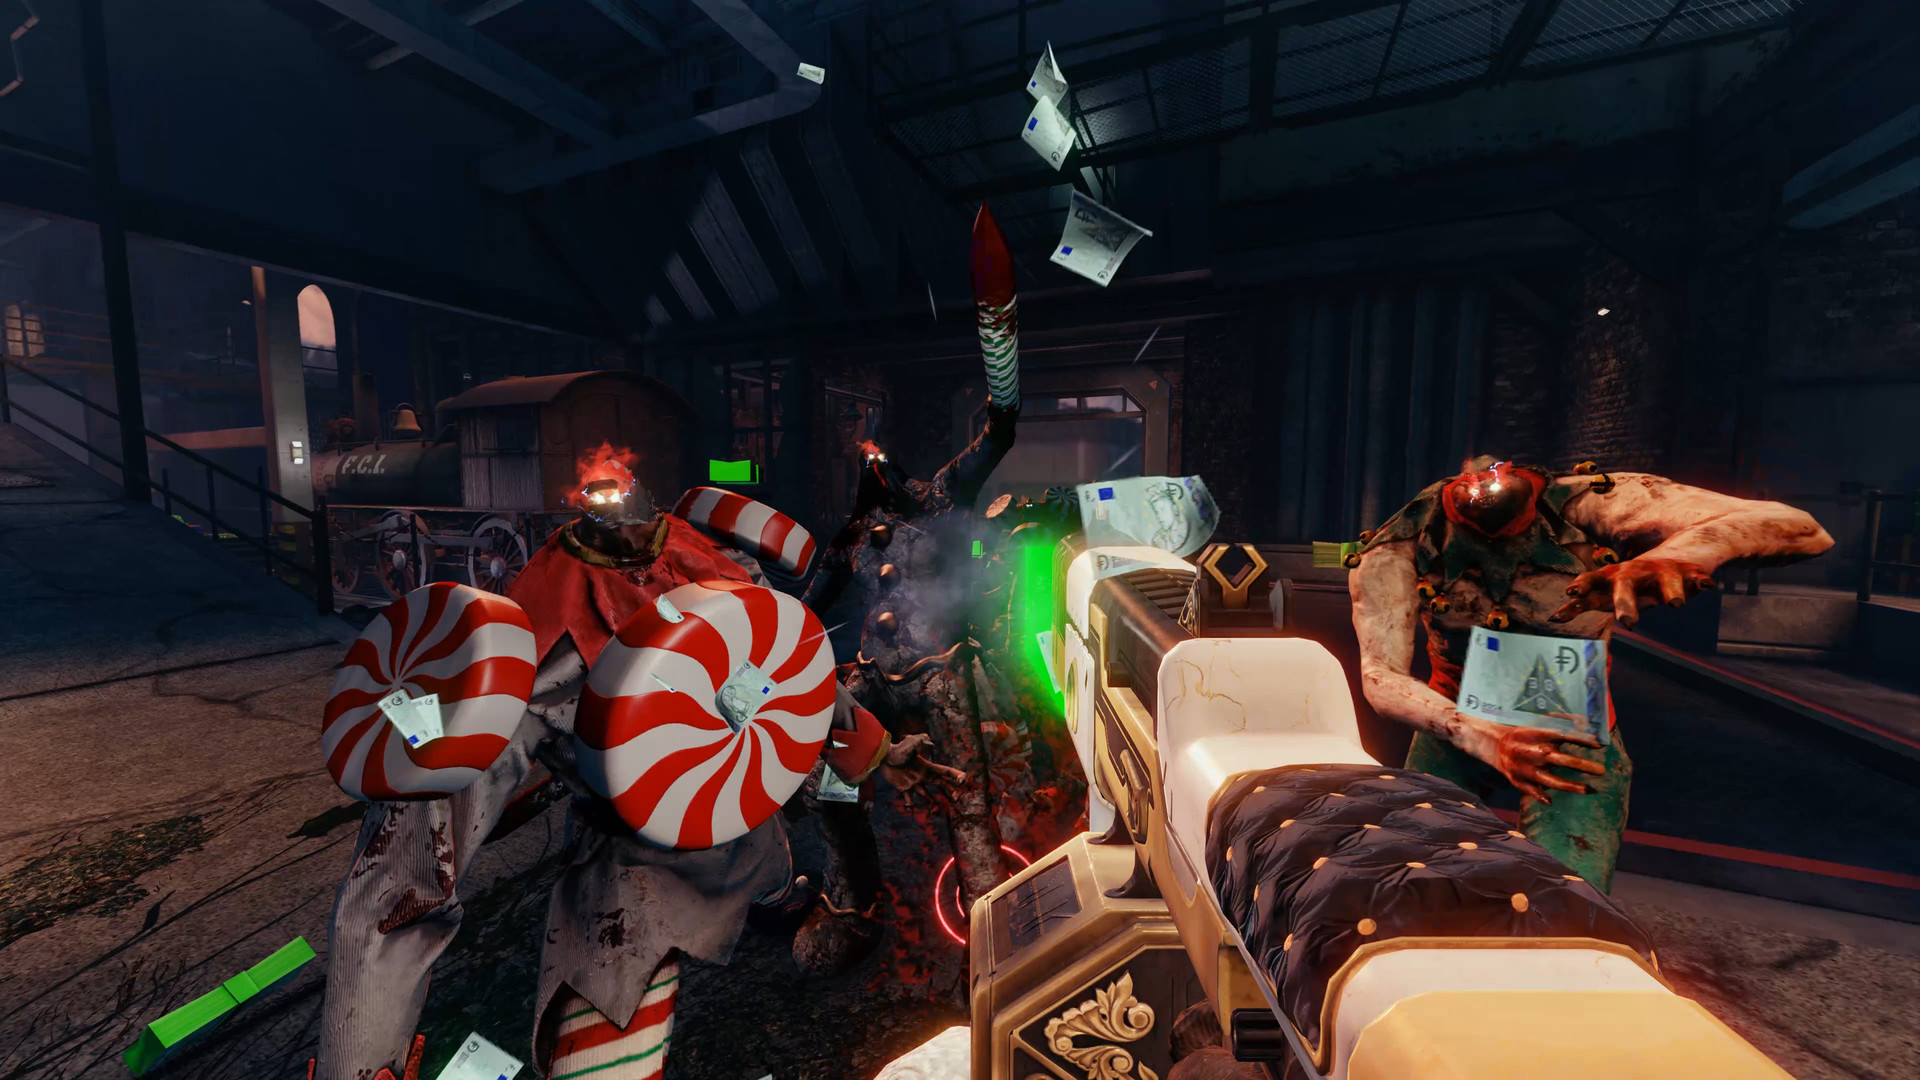 Killing Floor 2 and Two Other Games Free on Epic Games Store for Limited  Time